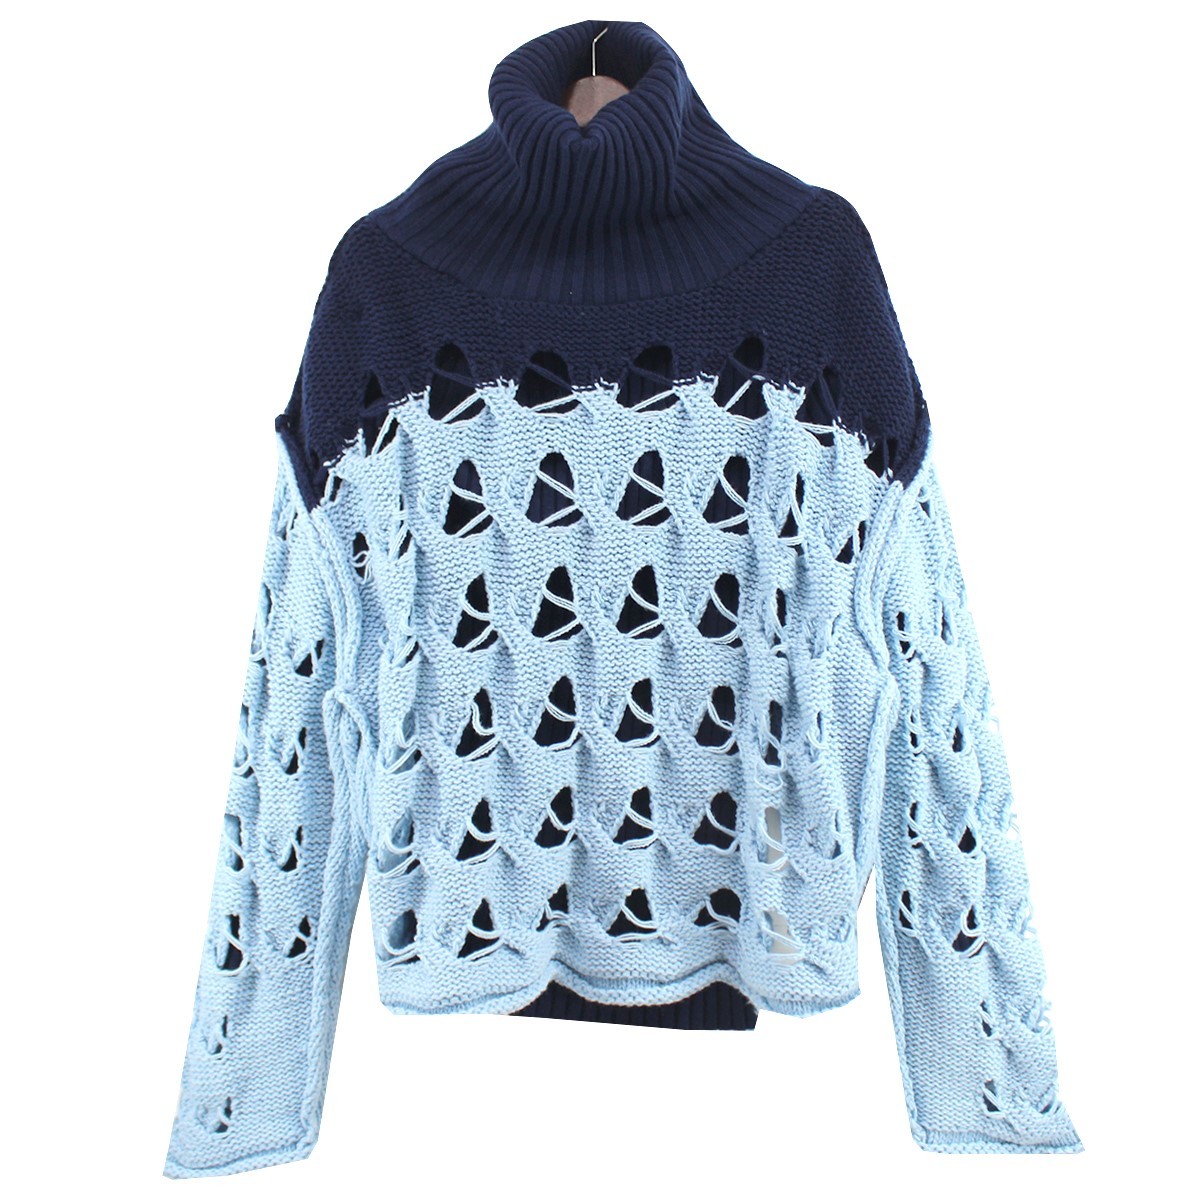 BASE MARK　 22AW JOINED CABLE KNIT SWEATER ケーブルニット セーター 商品番号：8056000136258